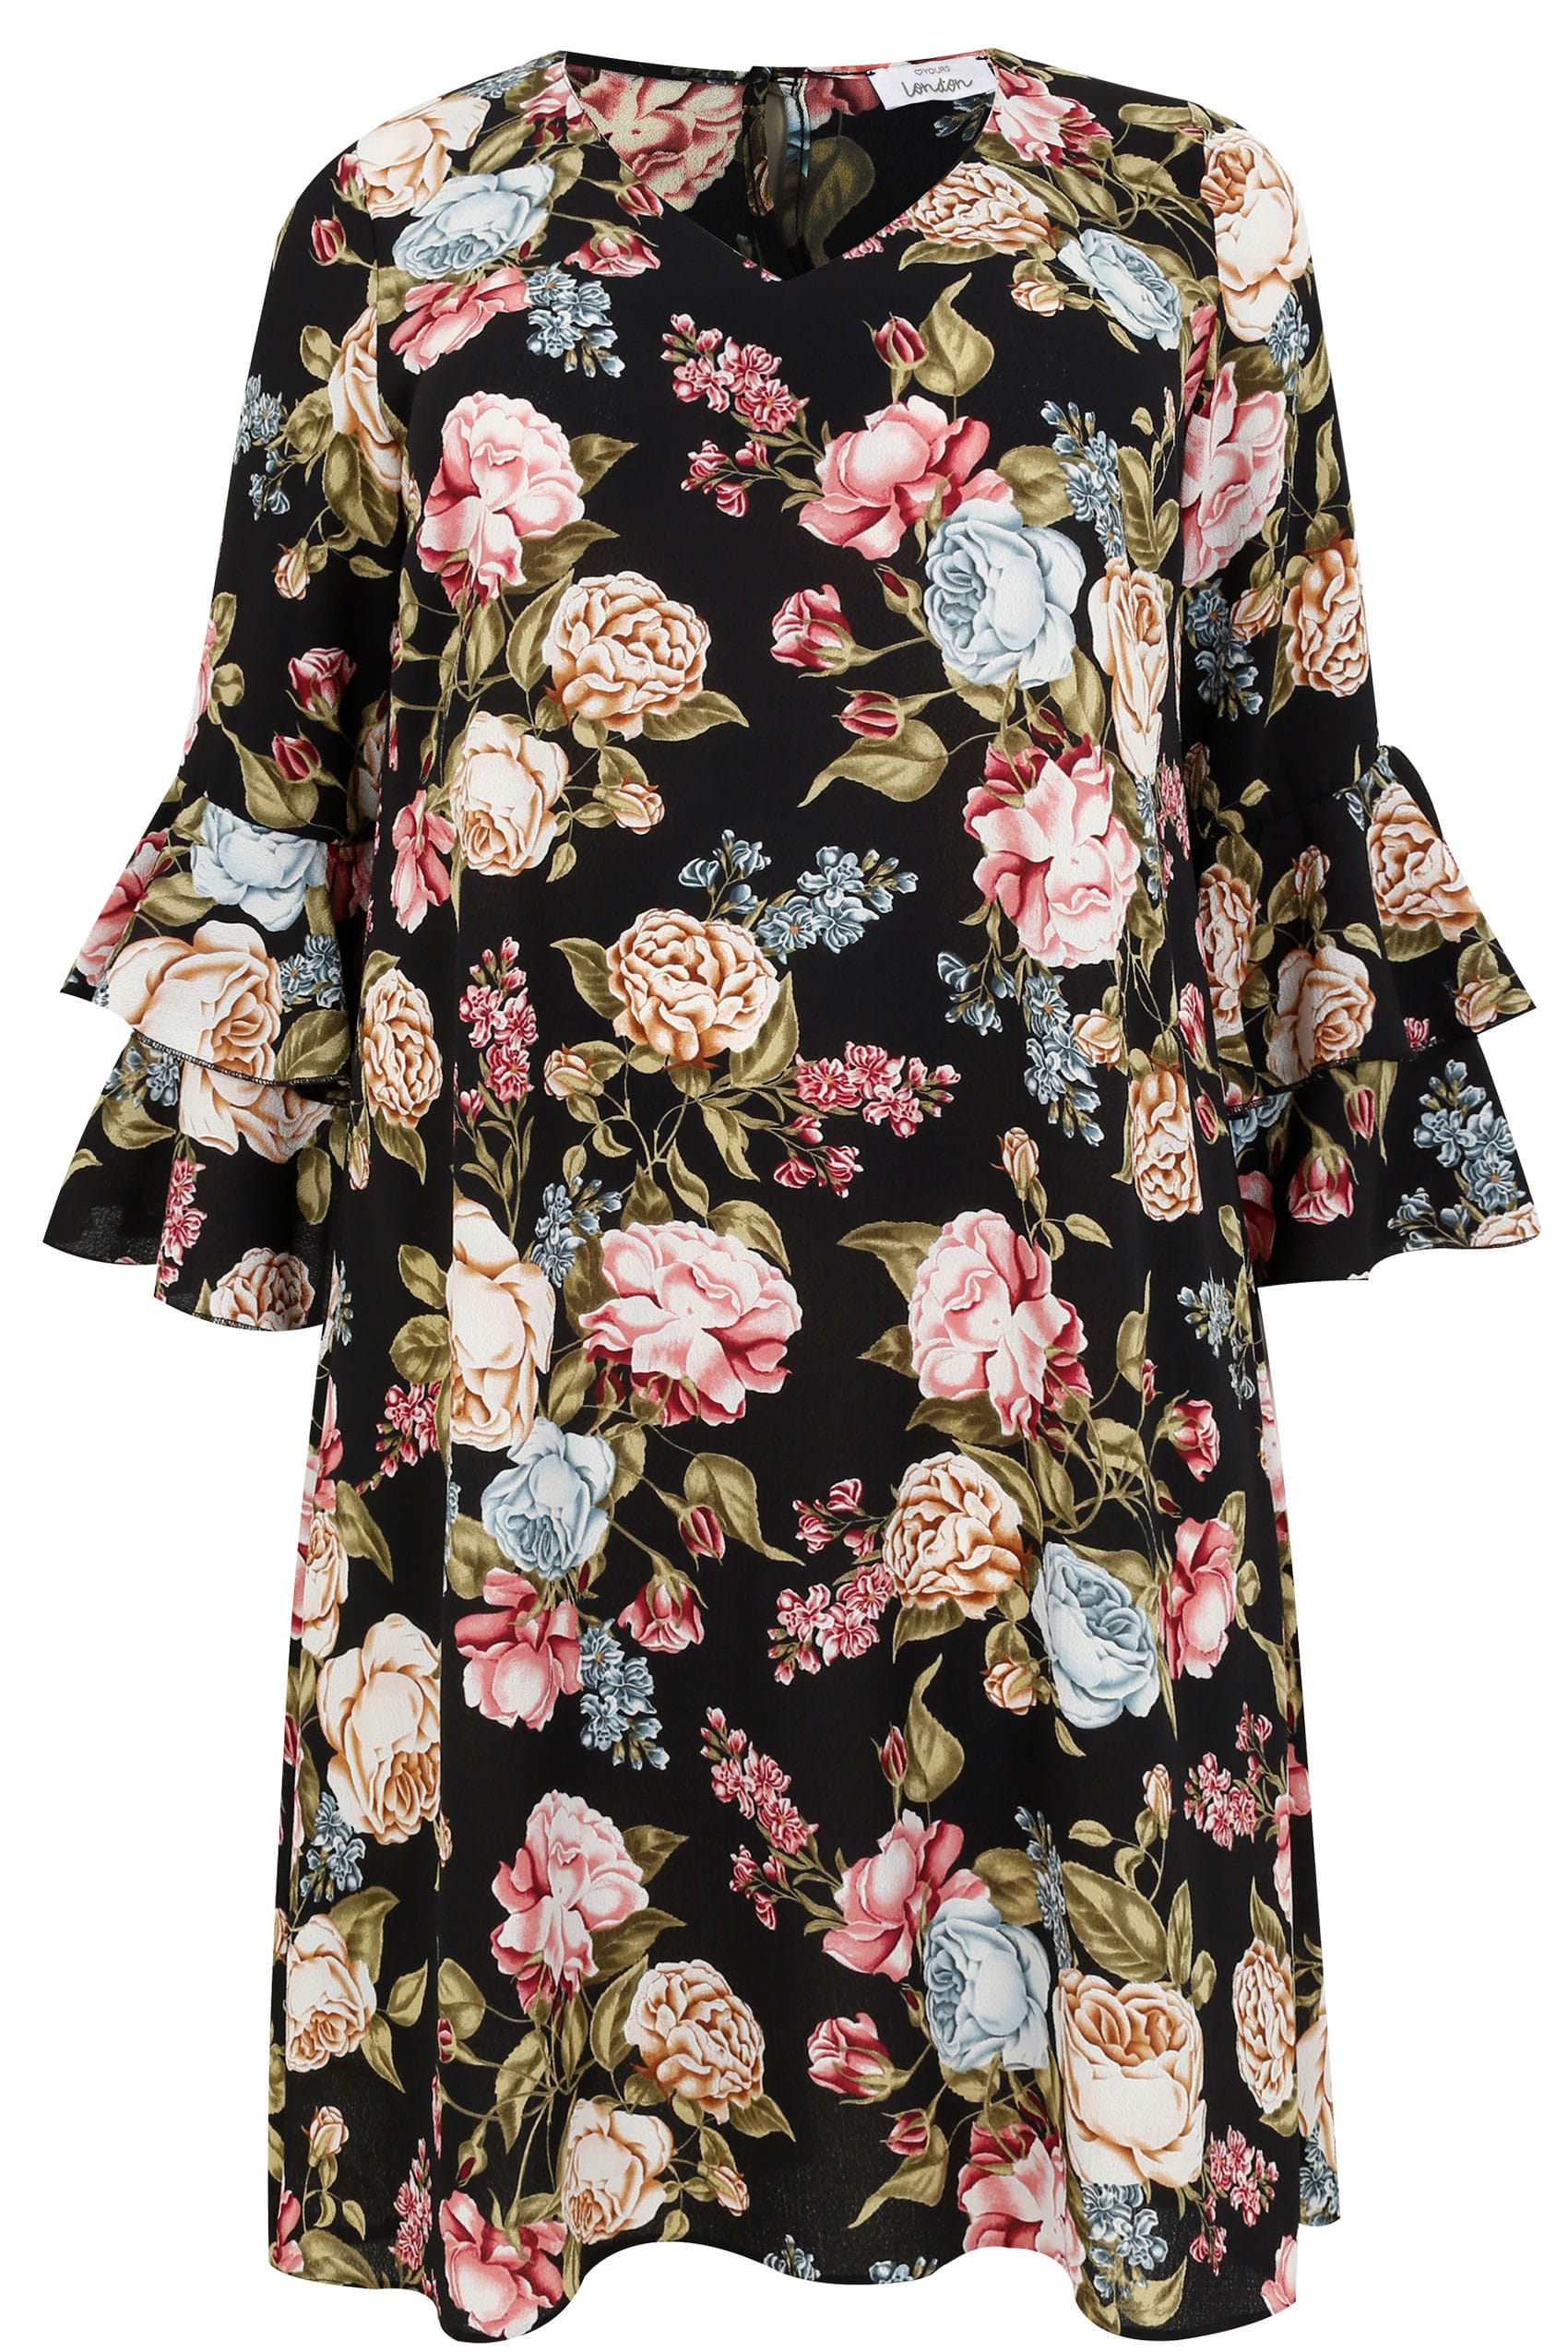 Black & Multi Floral Print Shift Dress With Layered Flute Sleeves, Plus ...